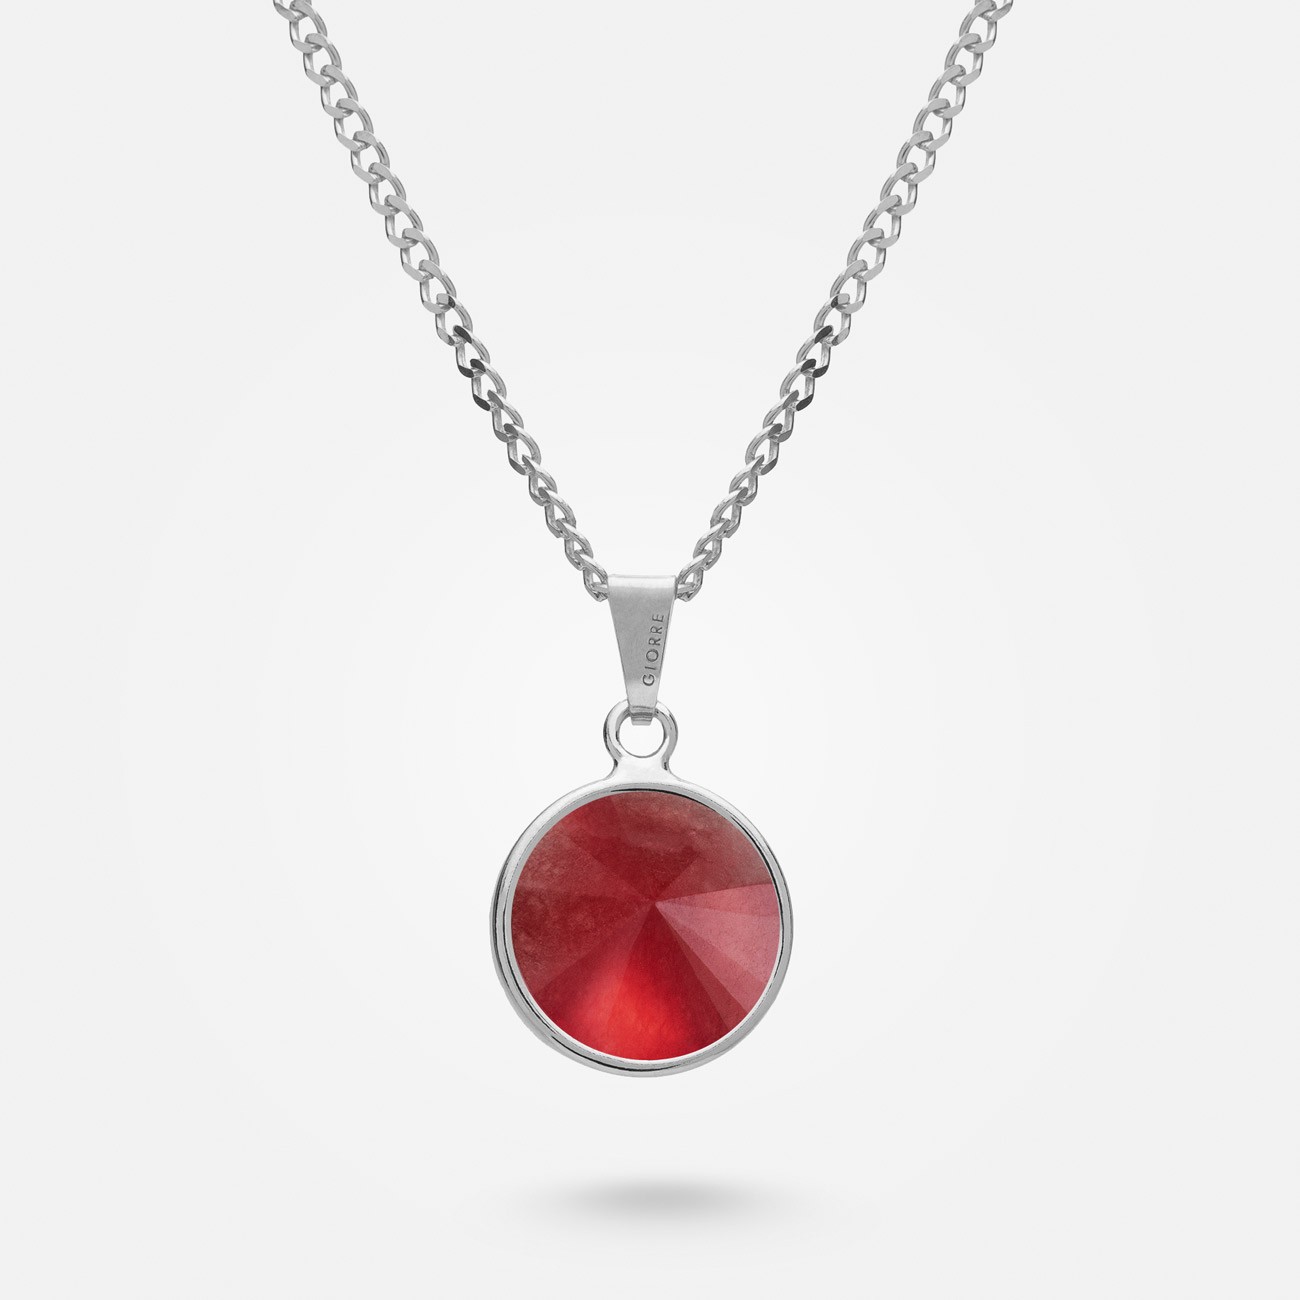 Necklace with natural stone, sterling silver 925